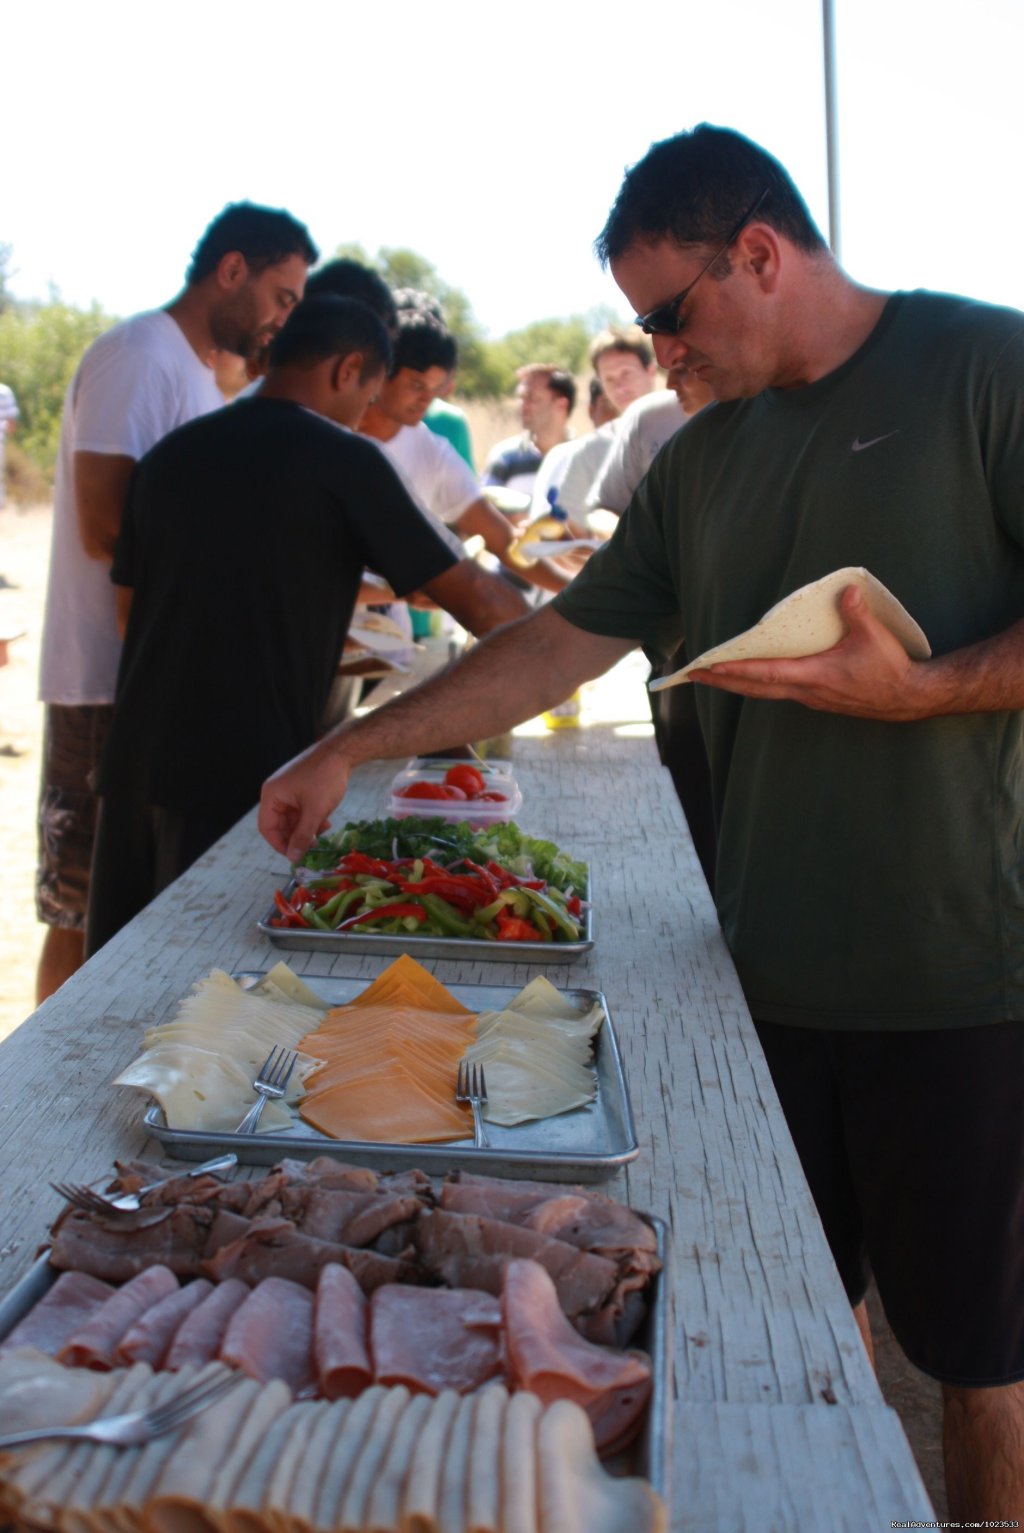 Deli-Style Lunch Served Riverside | American Whitewater Expeditions Rafting Adventures | Image #10/26 | 